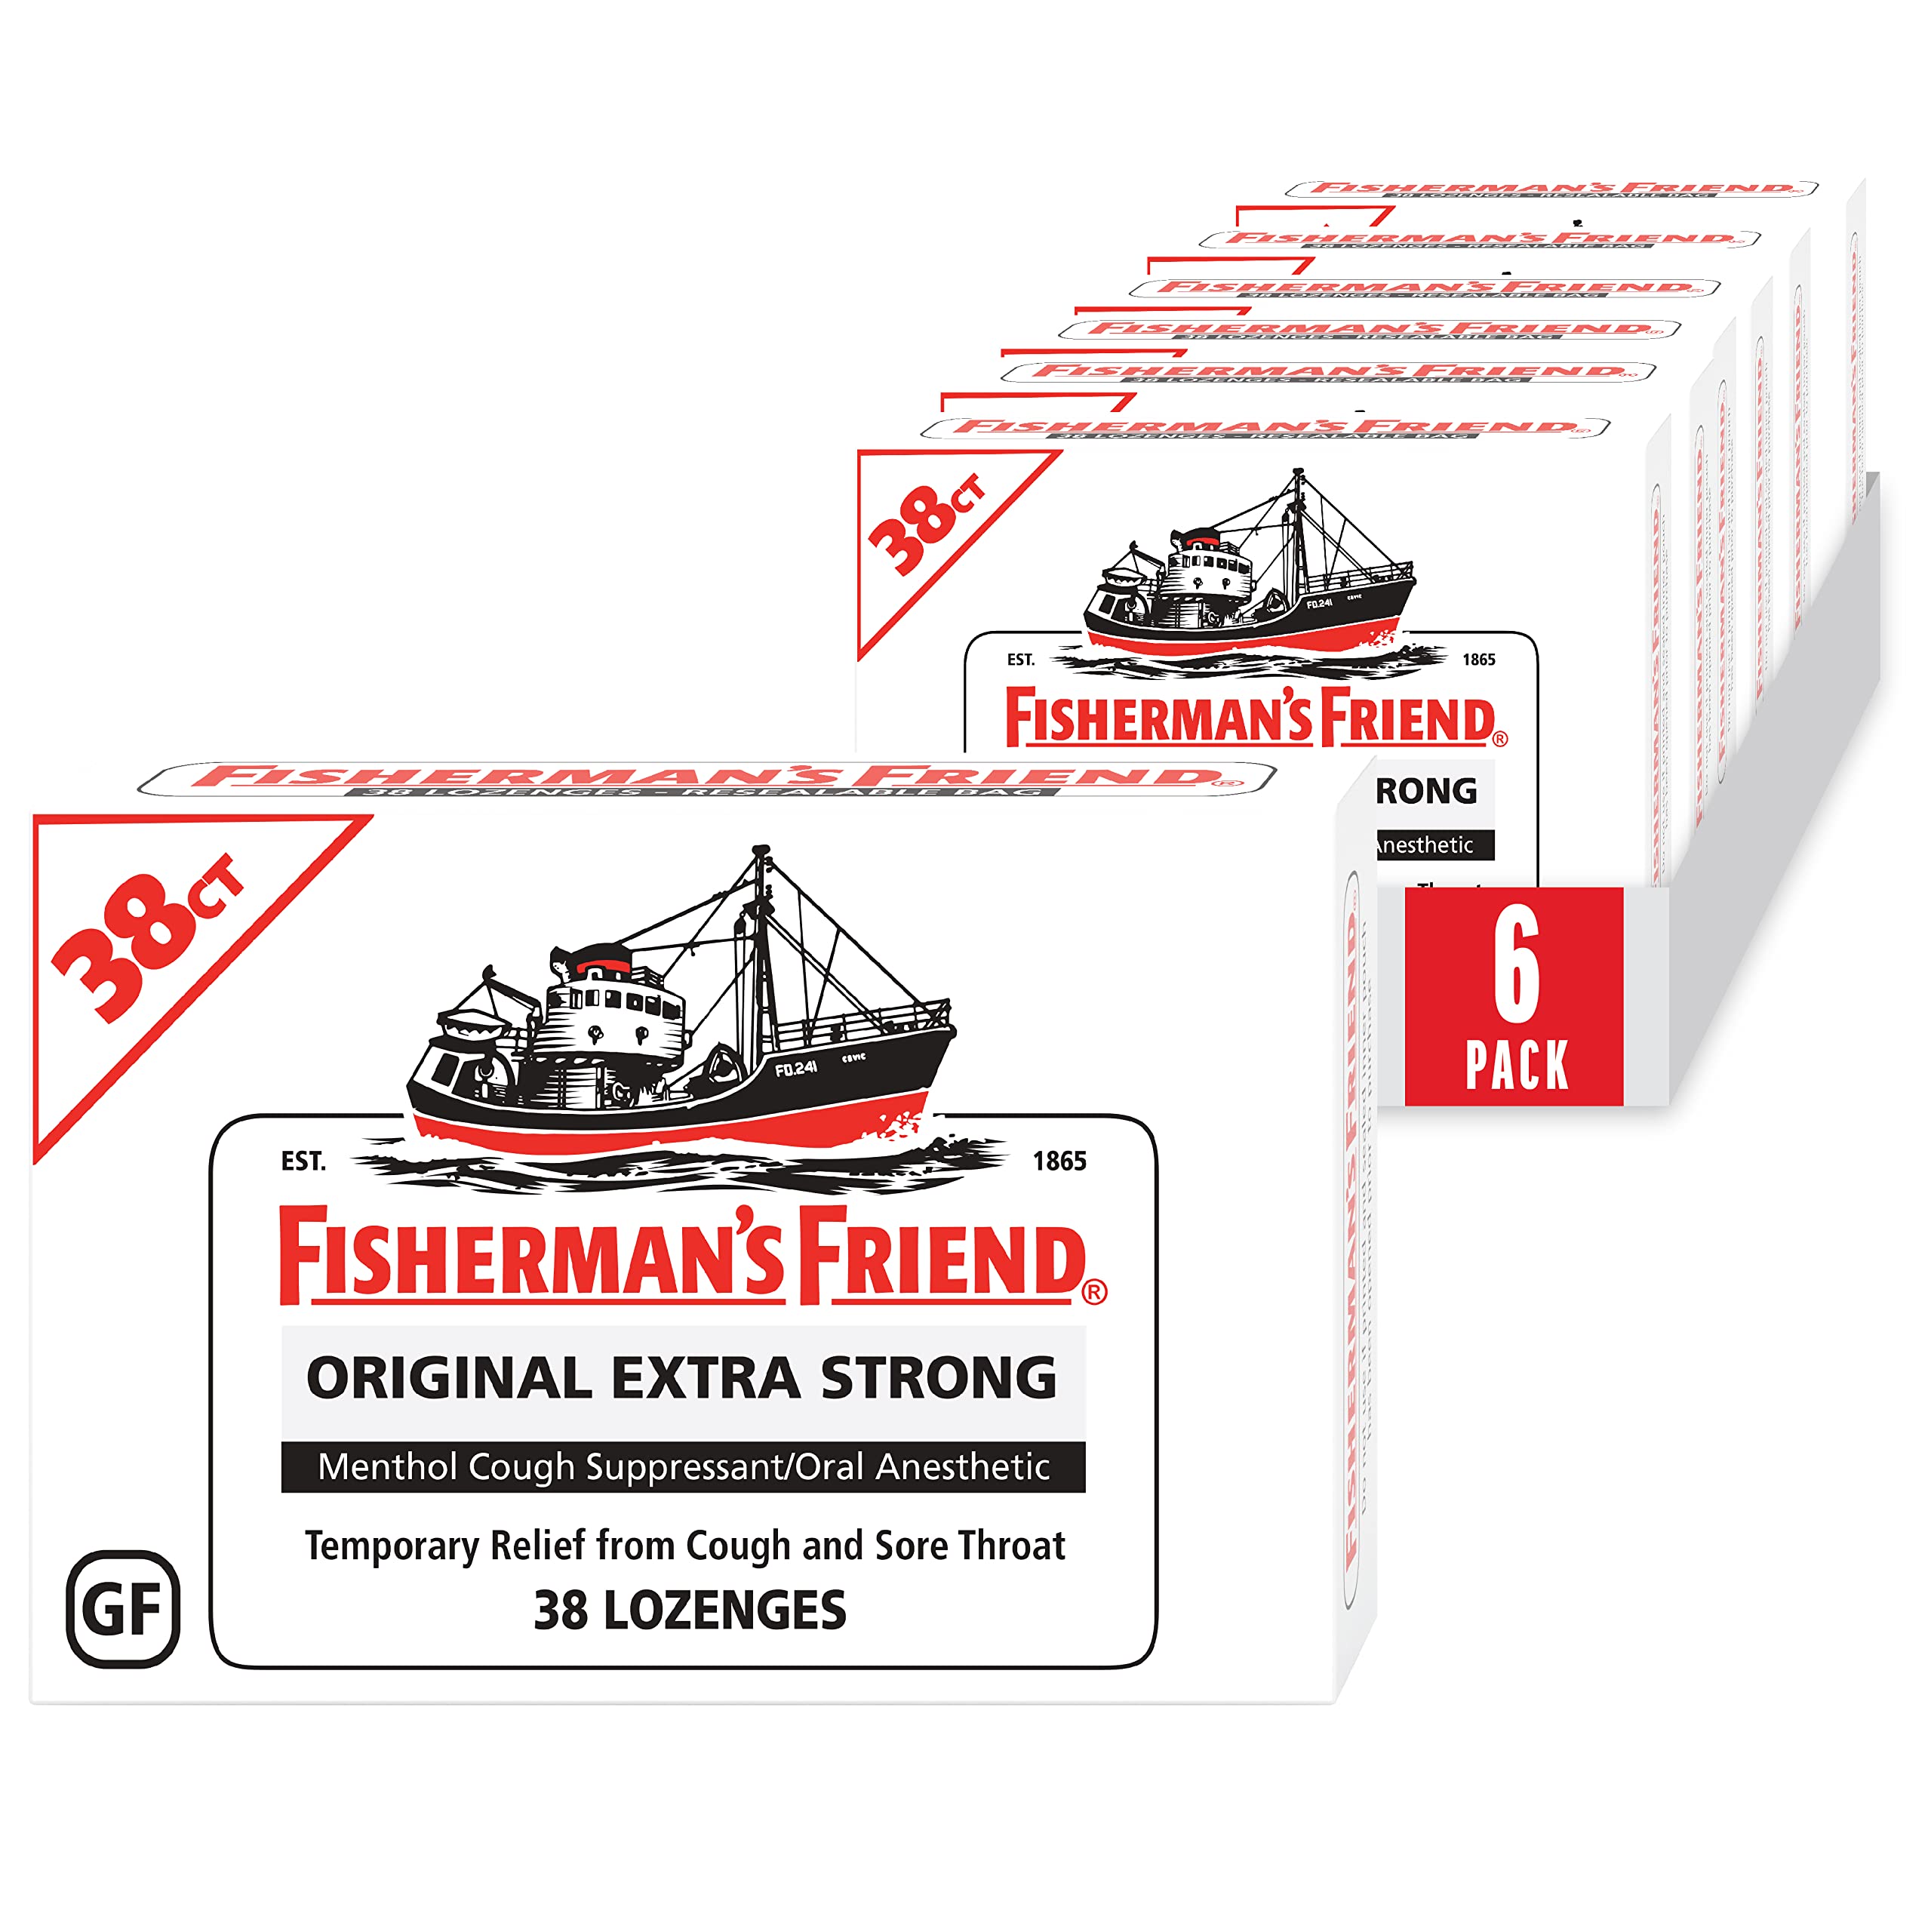 Fisherman's Friend Cough Drops, Cough Suppressant and Sore Throat Lozenges, Original Extra Strong, 10mg Menthol, 228 Drops (6 Pa